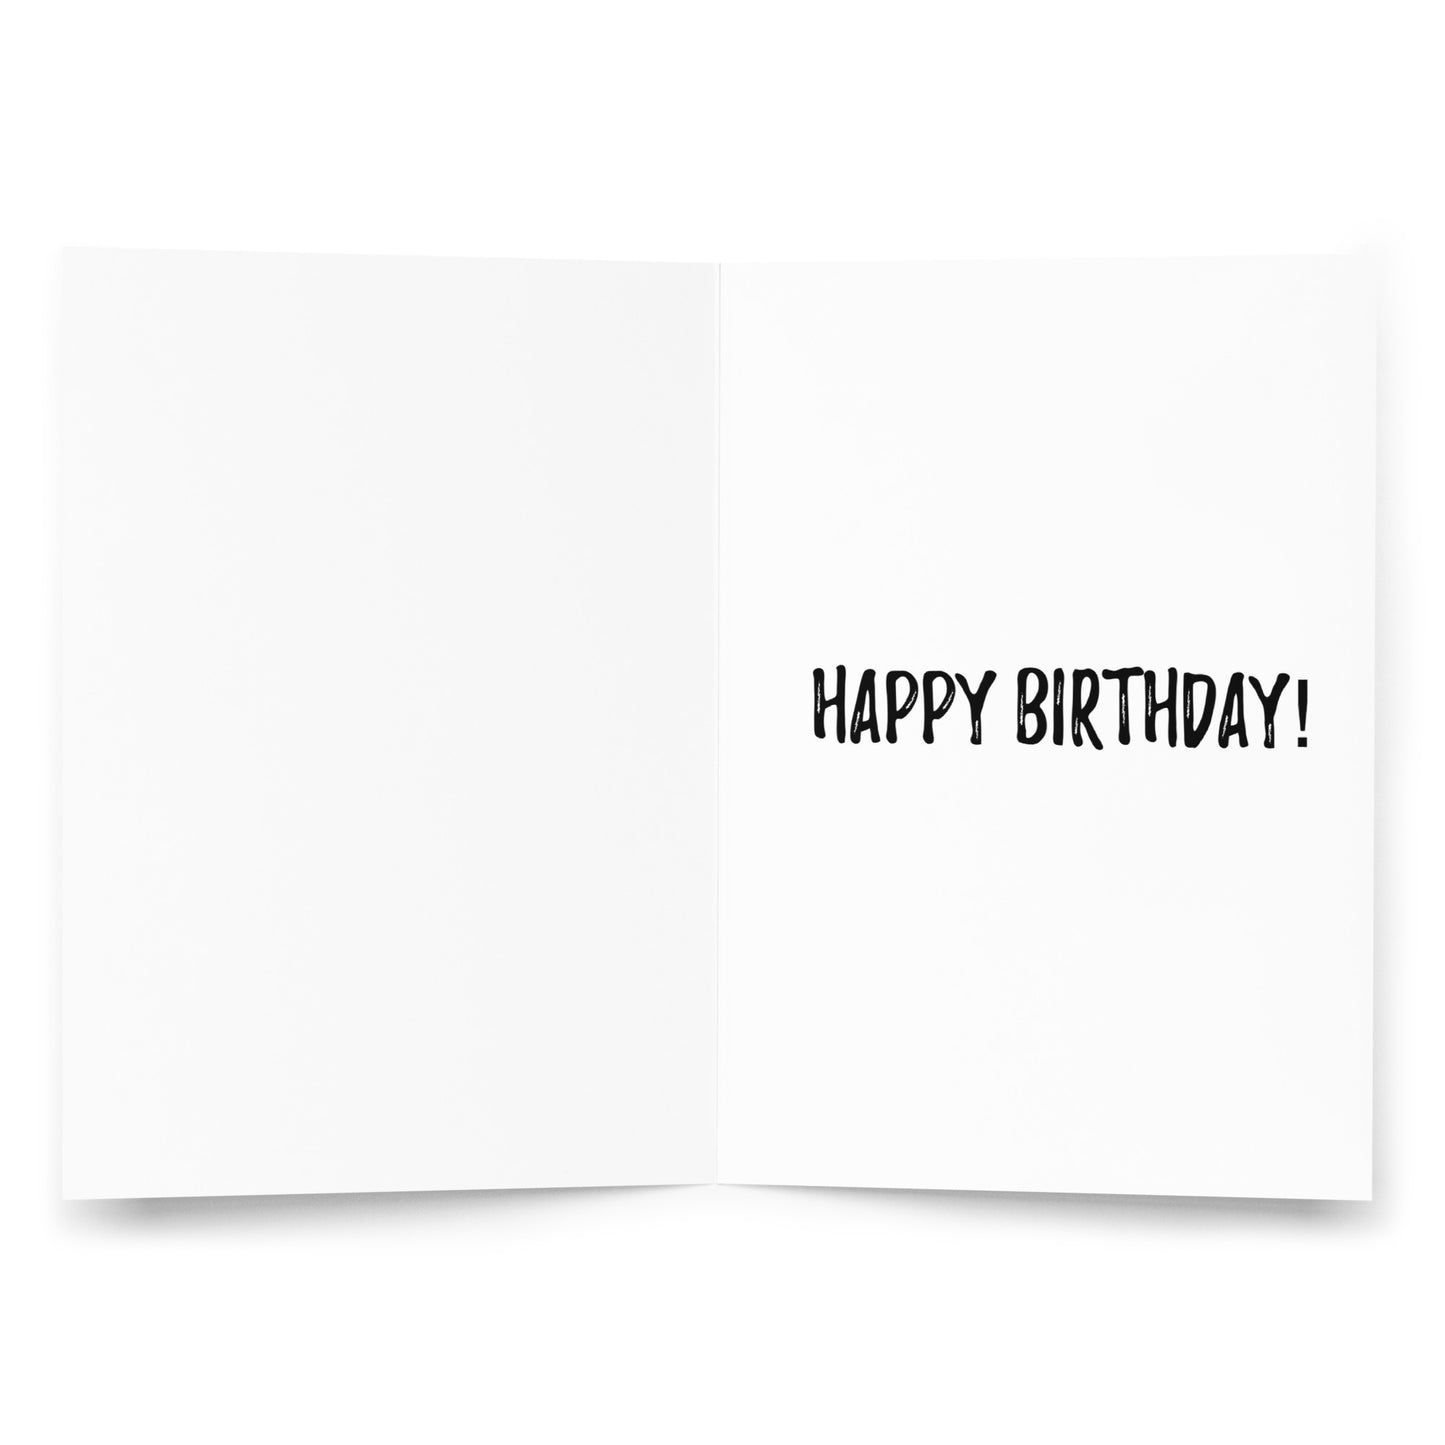 Funny 31st birthday card | now that's what I call old! A5 card | 31 years old